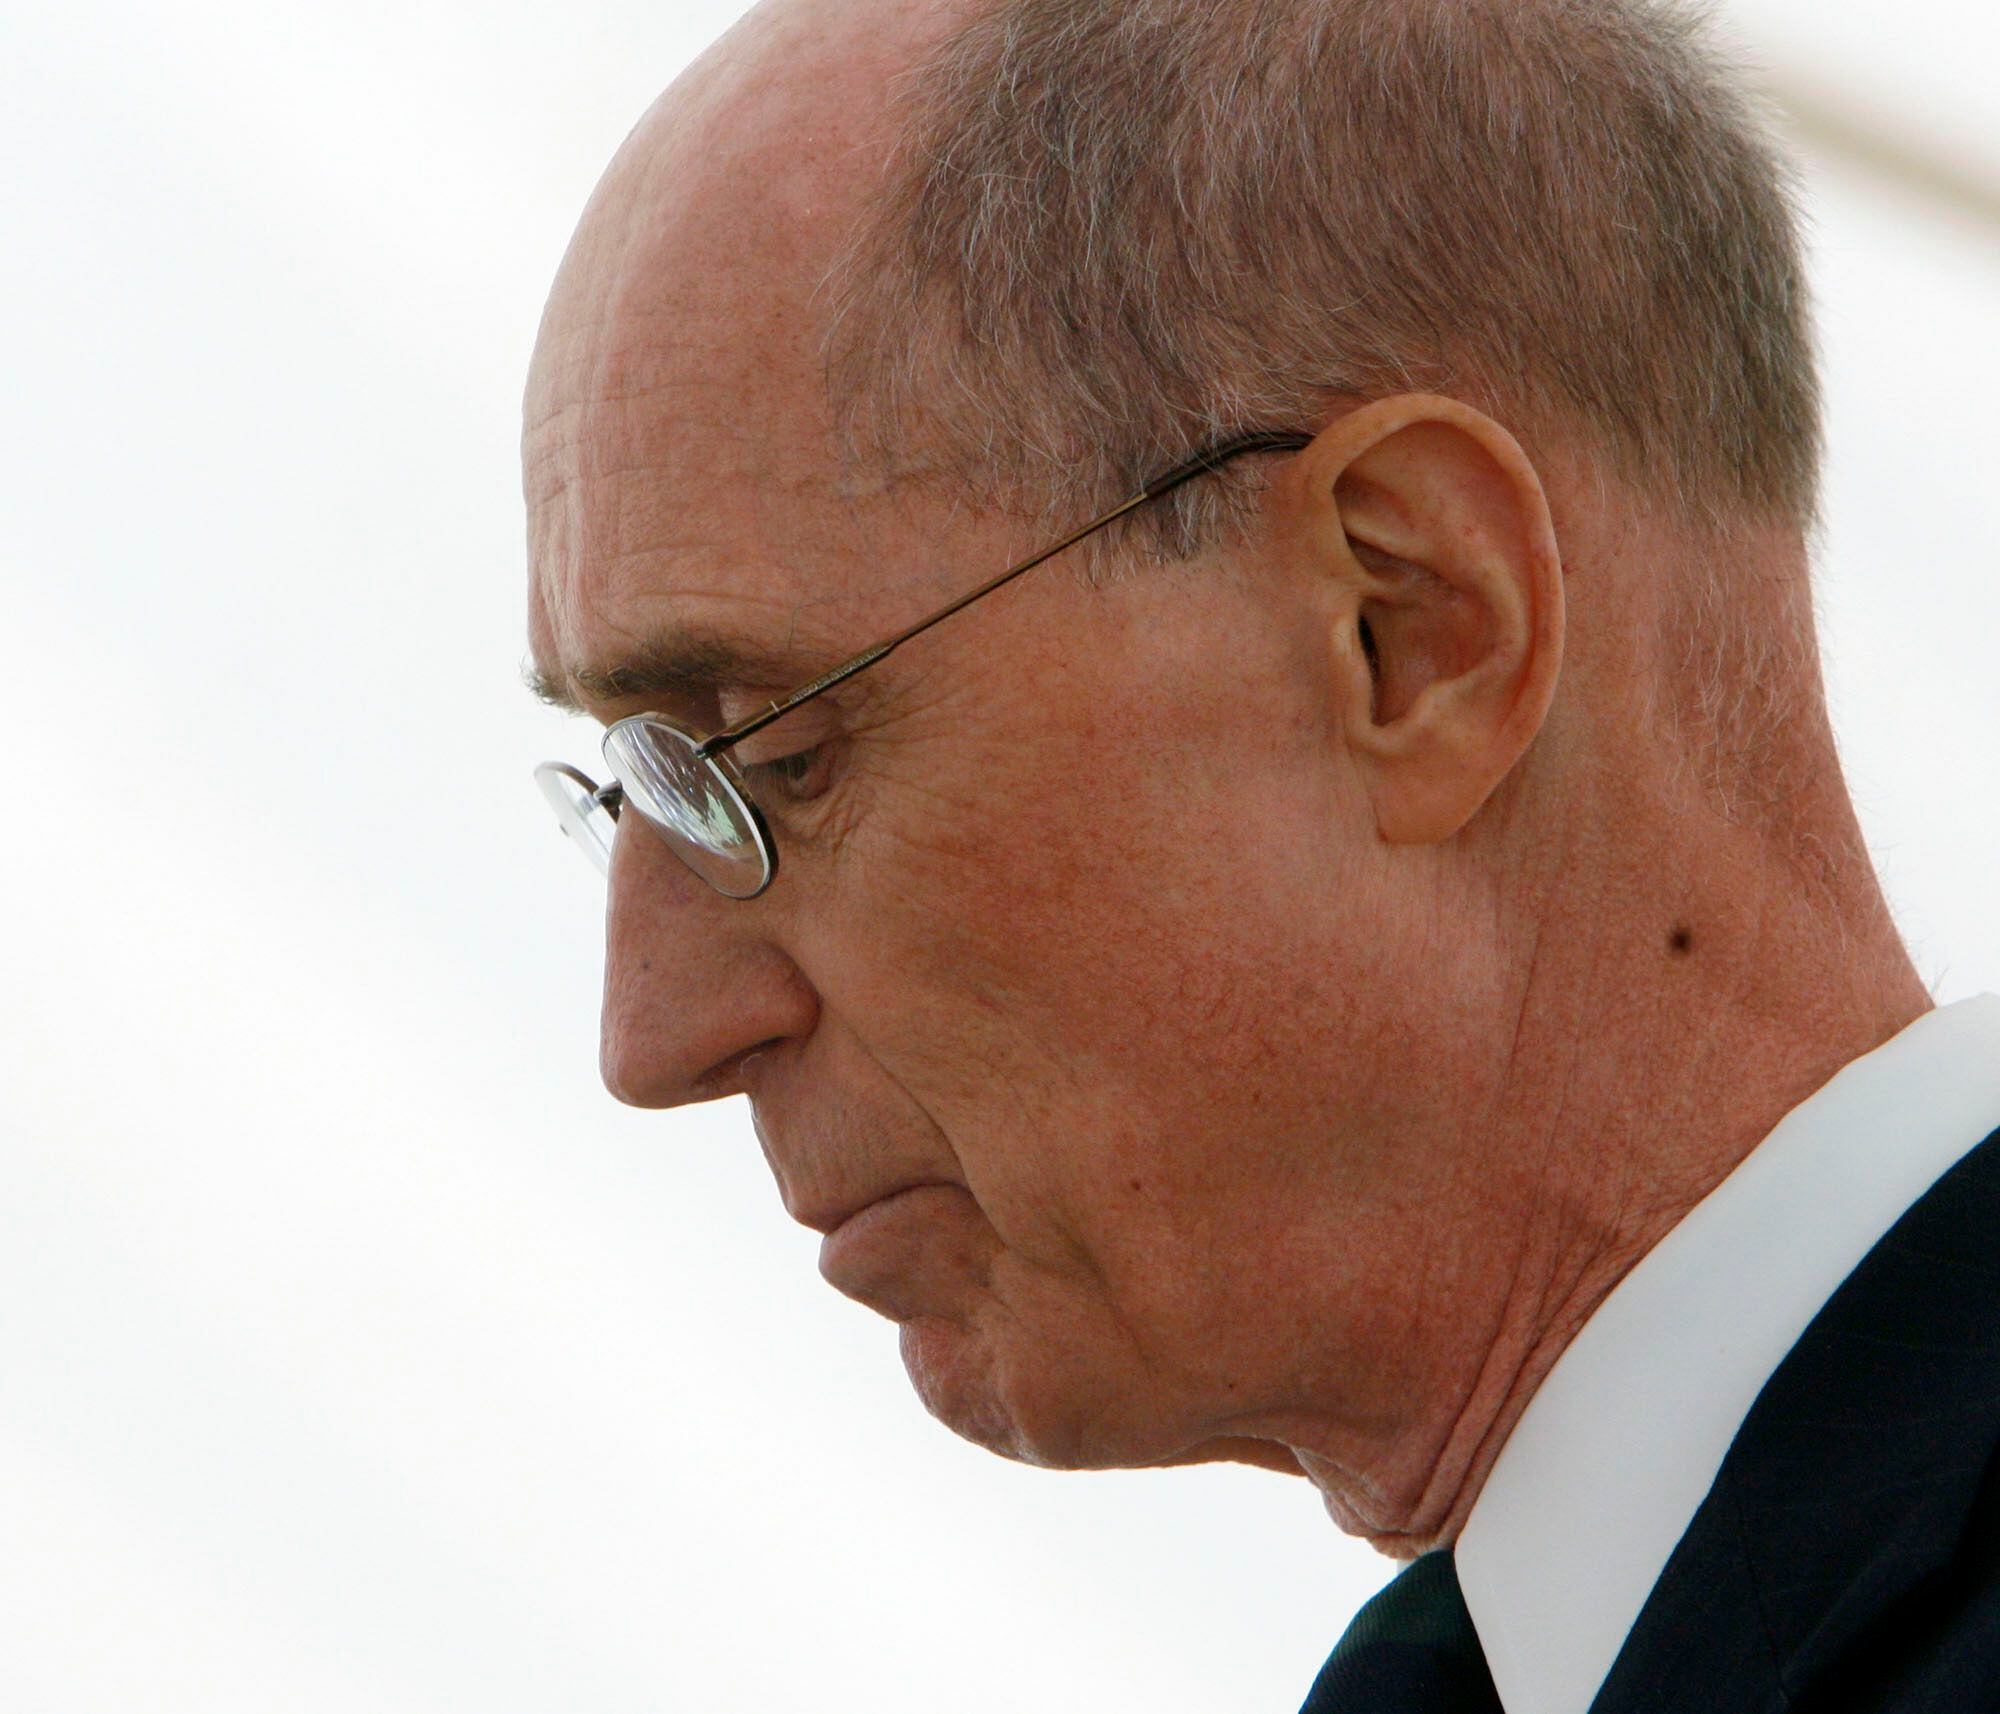 (Steve Griffin | The Salt Lake Tribune) An emotional Henry B. Eyring lowers his head while speaking during a Mountain Meadows Massacre memorial service in 2007.